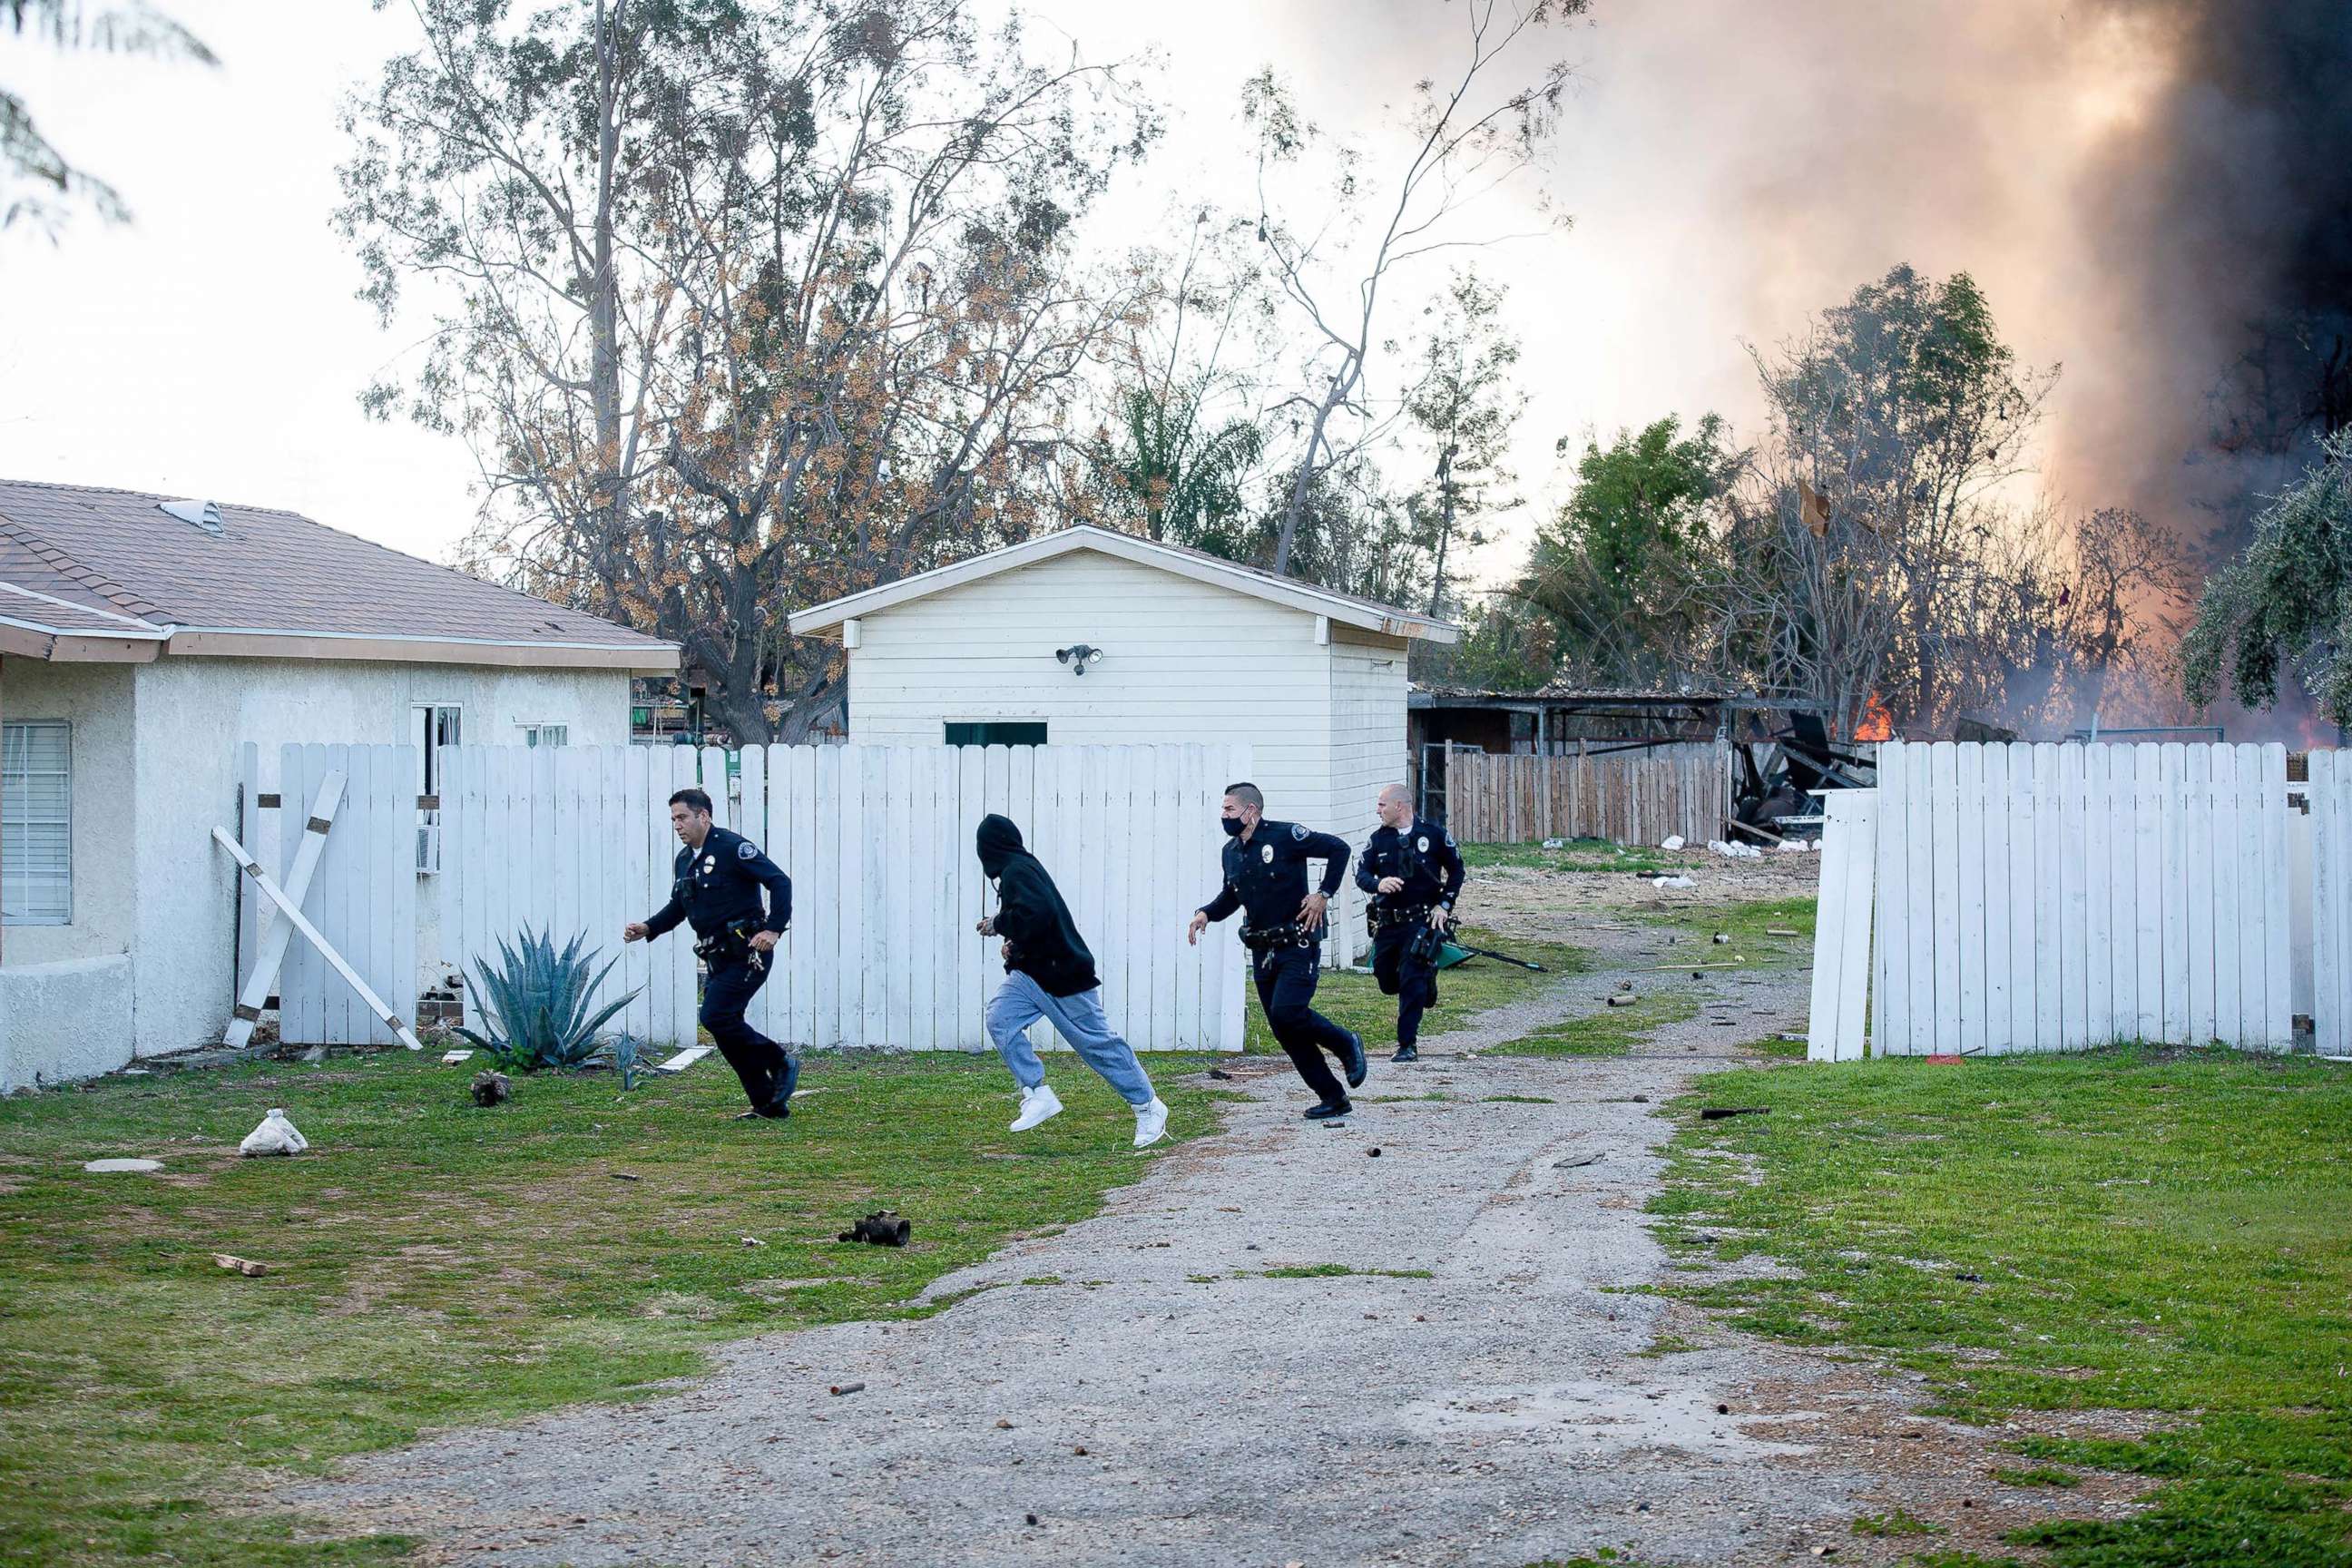 PHOTO: Ontario Police officers and a man are seen running away from an explosion at a home in Ontario, Calif., March 16, 2021. 